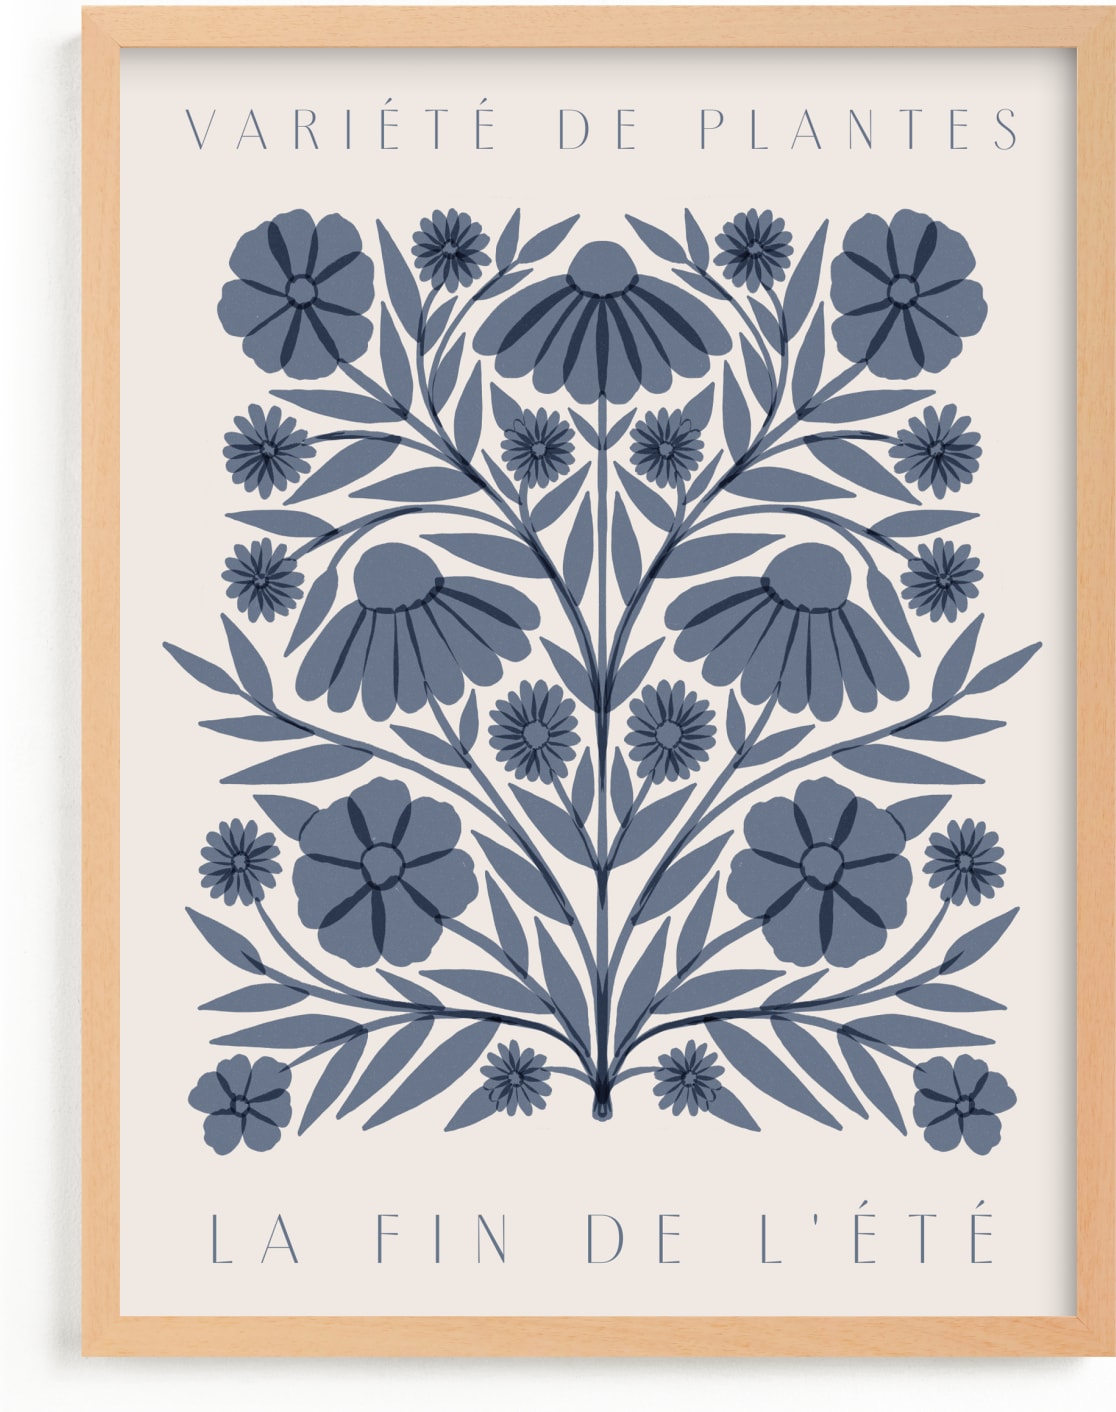 This is a blue art by Katharine Watson called Les Plantes II.